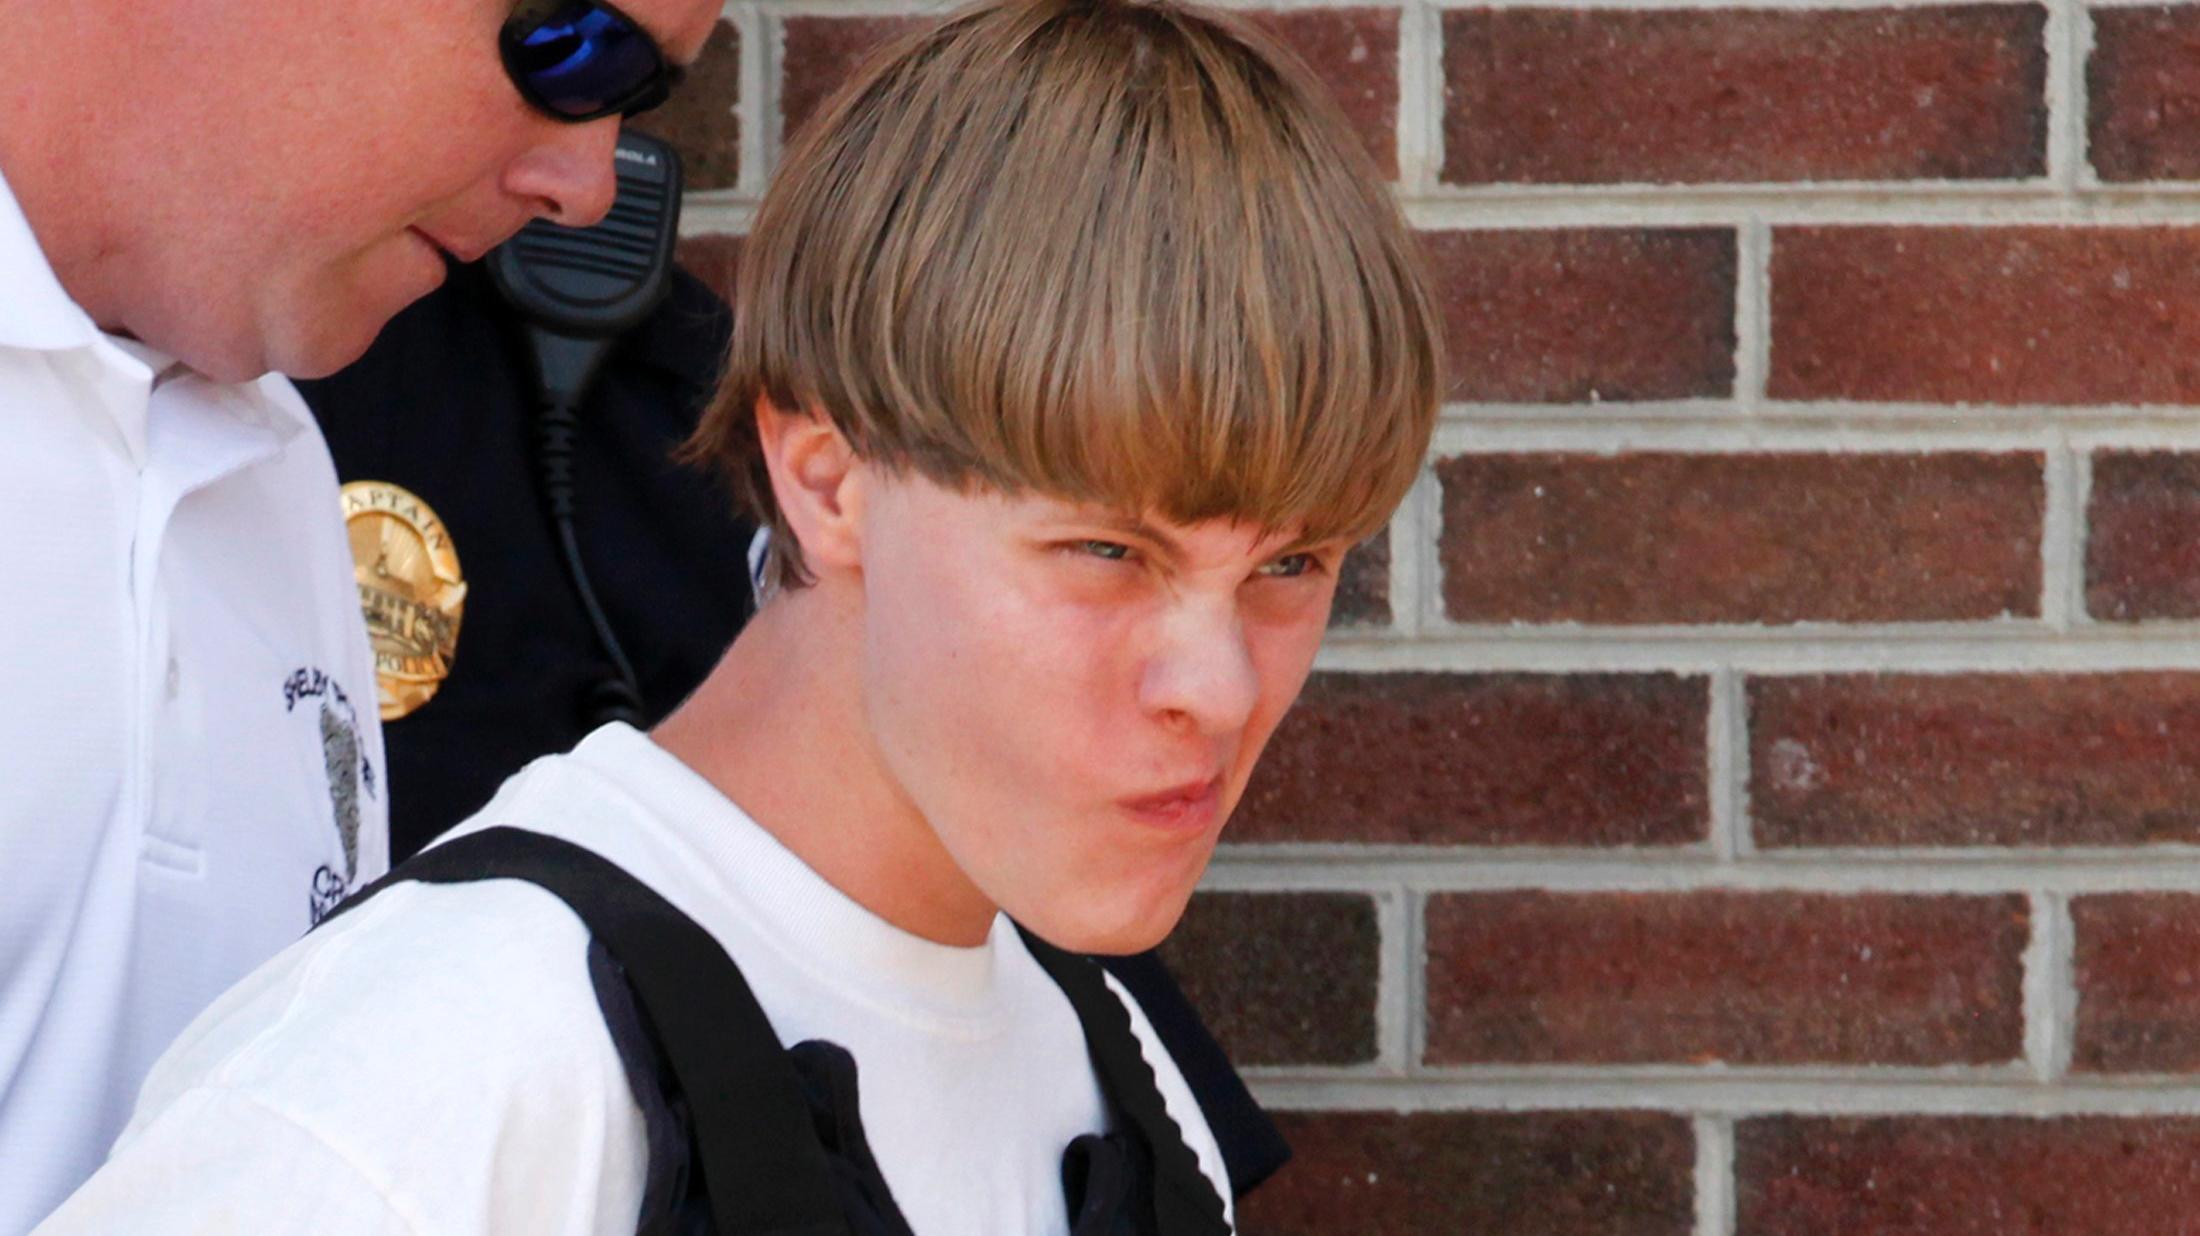 Police lead suspected shooter Dylann Roof, 21, into the courthouse in Shelby, North Carolina, June 18, 2015.